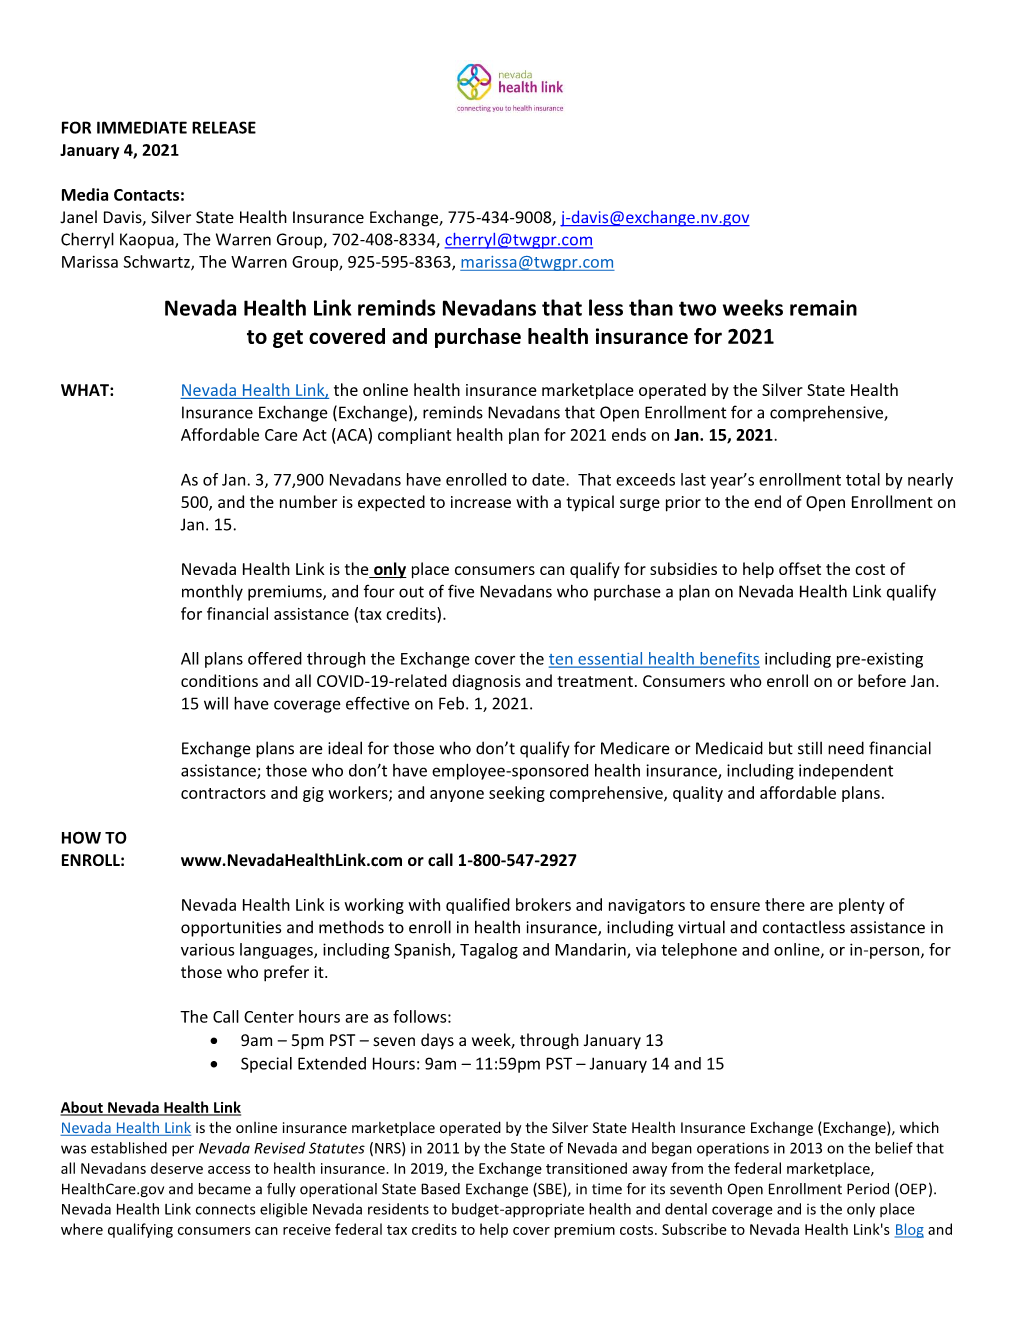 Nevada Health Link Reminds Nevadans That Less Than Two Weeks Remain to Get Covered and Purchase Health Insurance for 2021